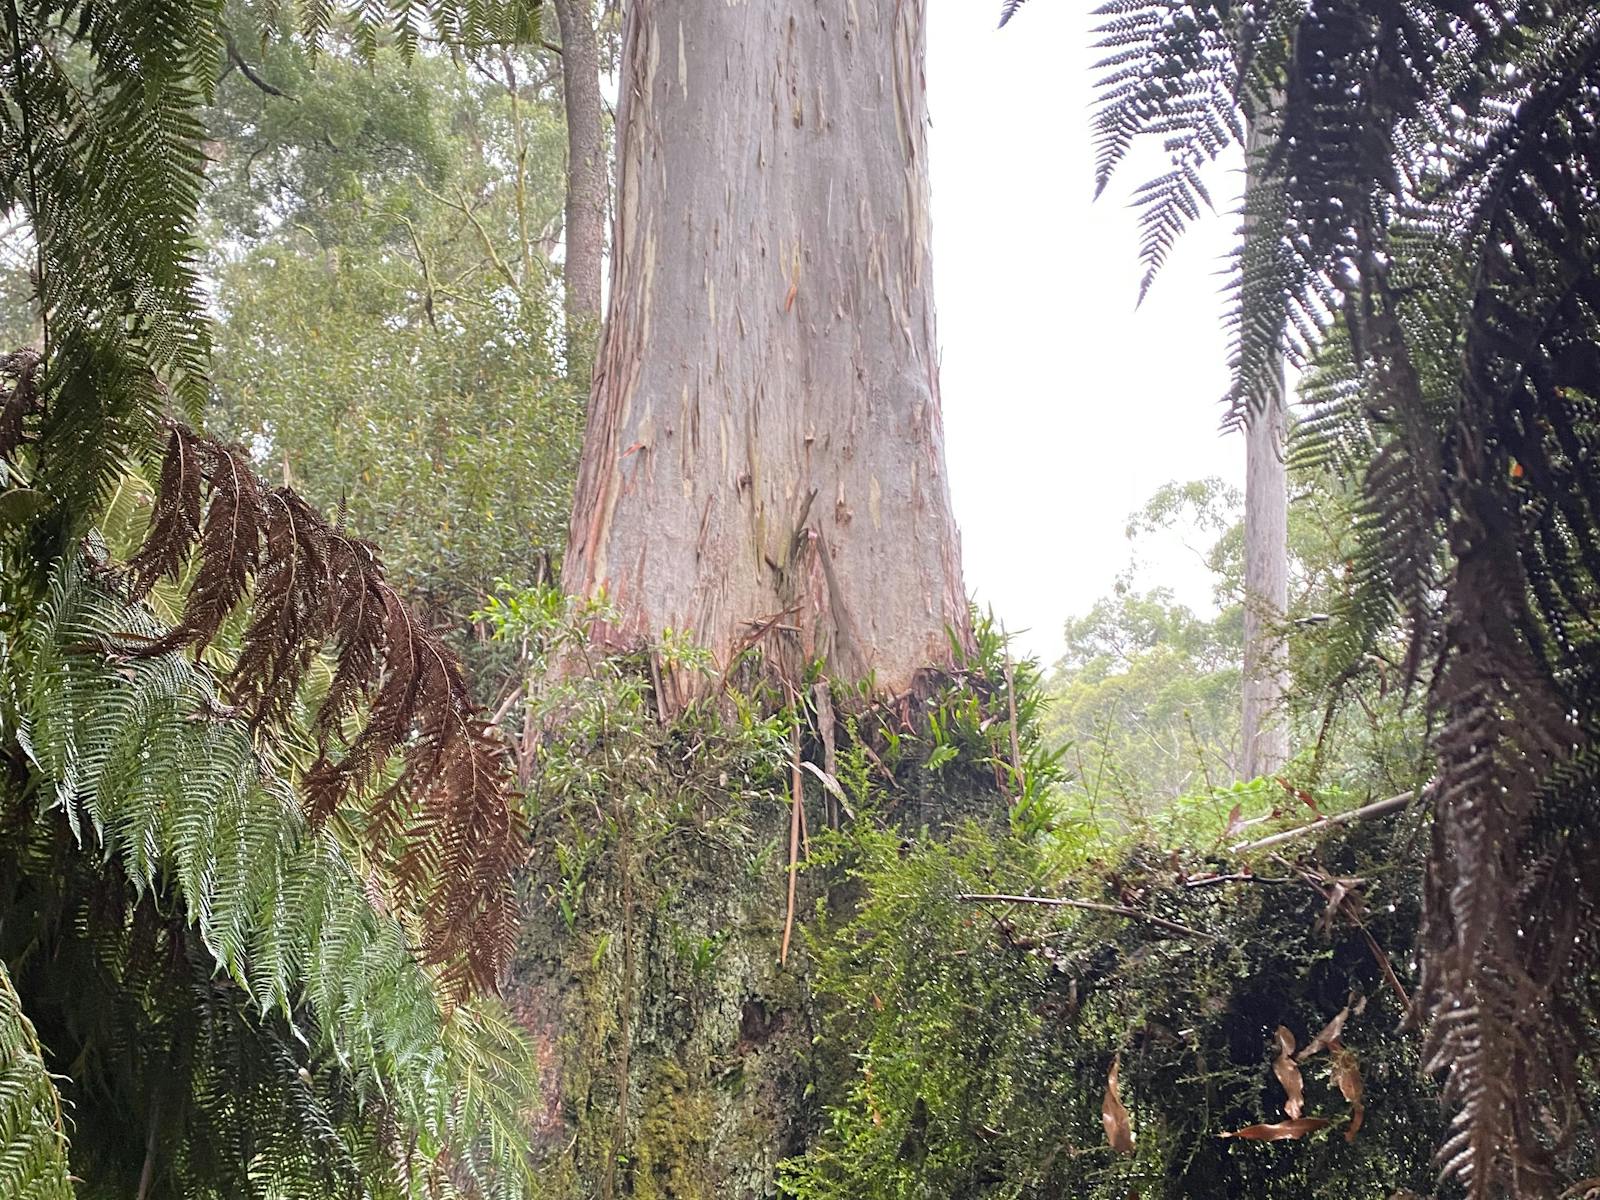 Original forest trees of Central North Coast